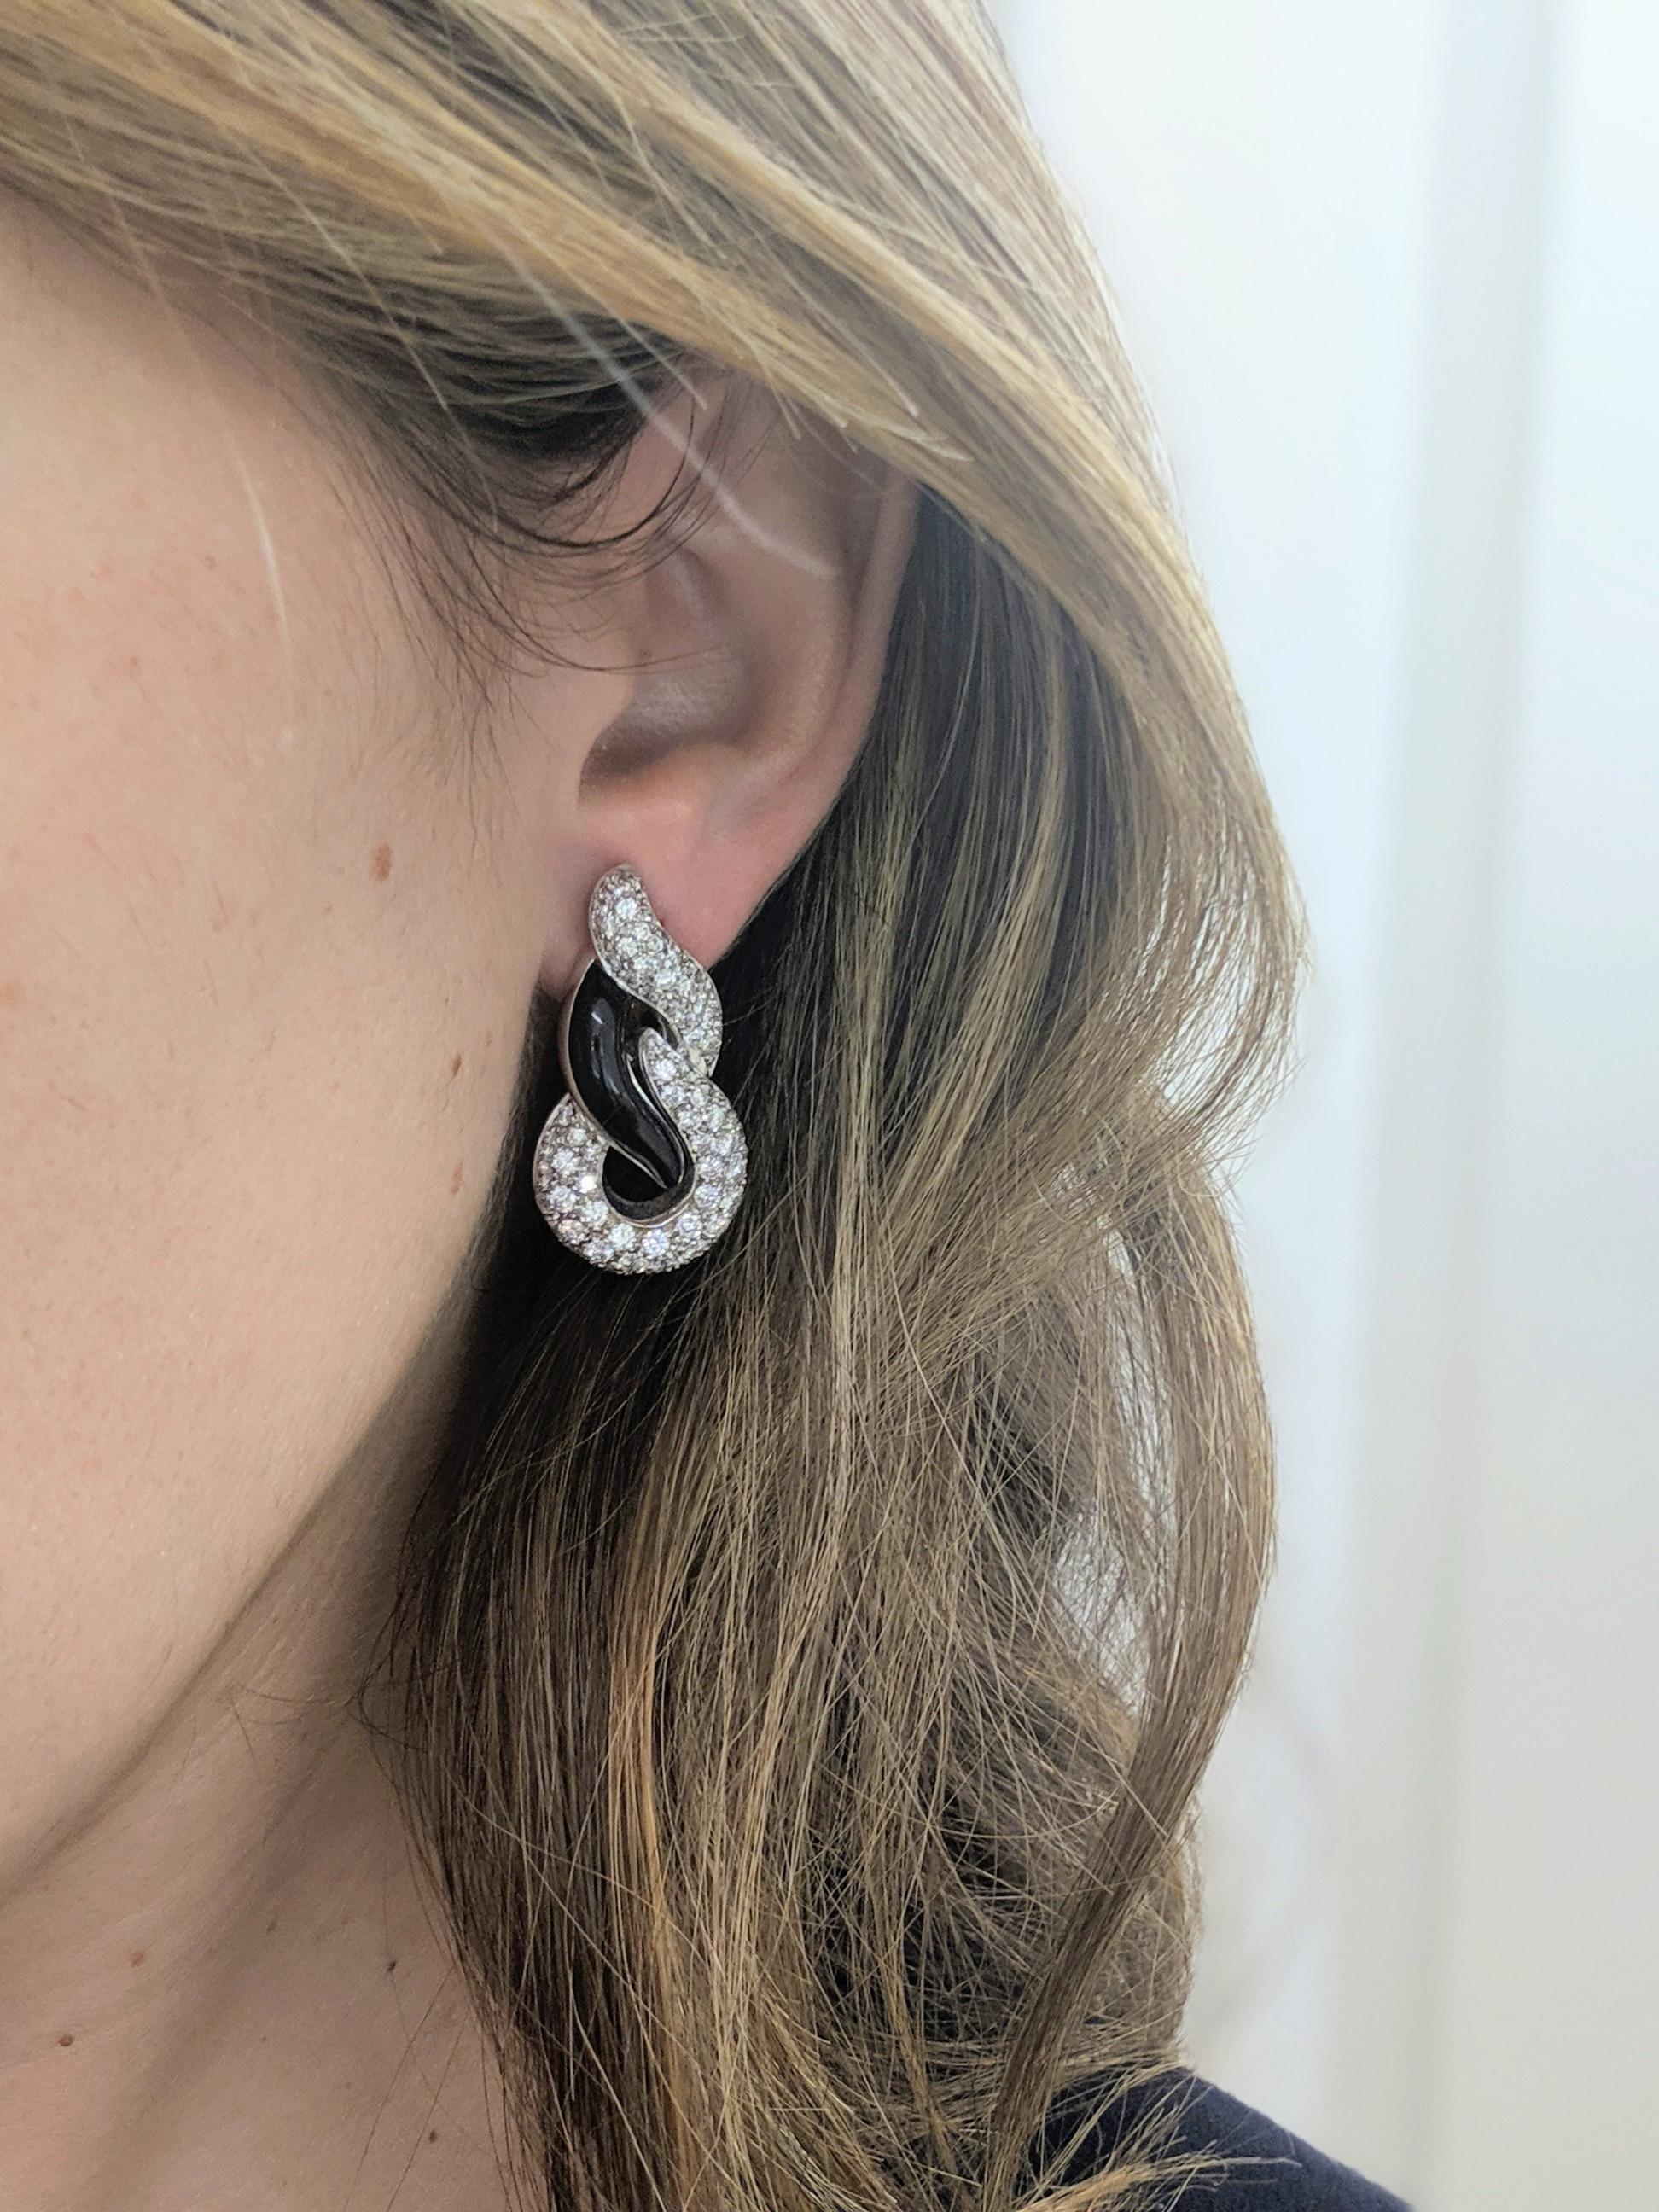 Lovely and elegant would best describe these earrings. Crafted entirely in 18 karat white gold and set with round brilliant pave diamonds and black onyx. The beautiful curves of the earrings allow them to sit beautifully, framing the face.  The